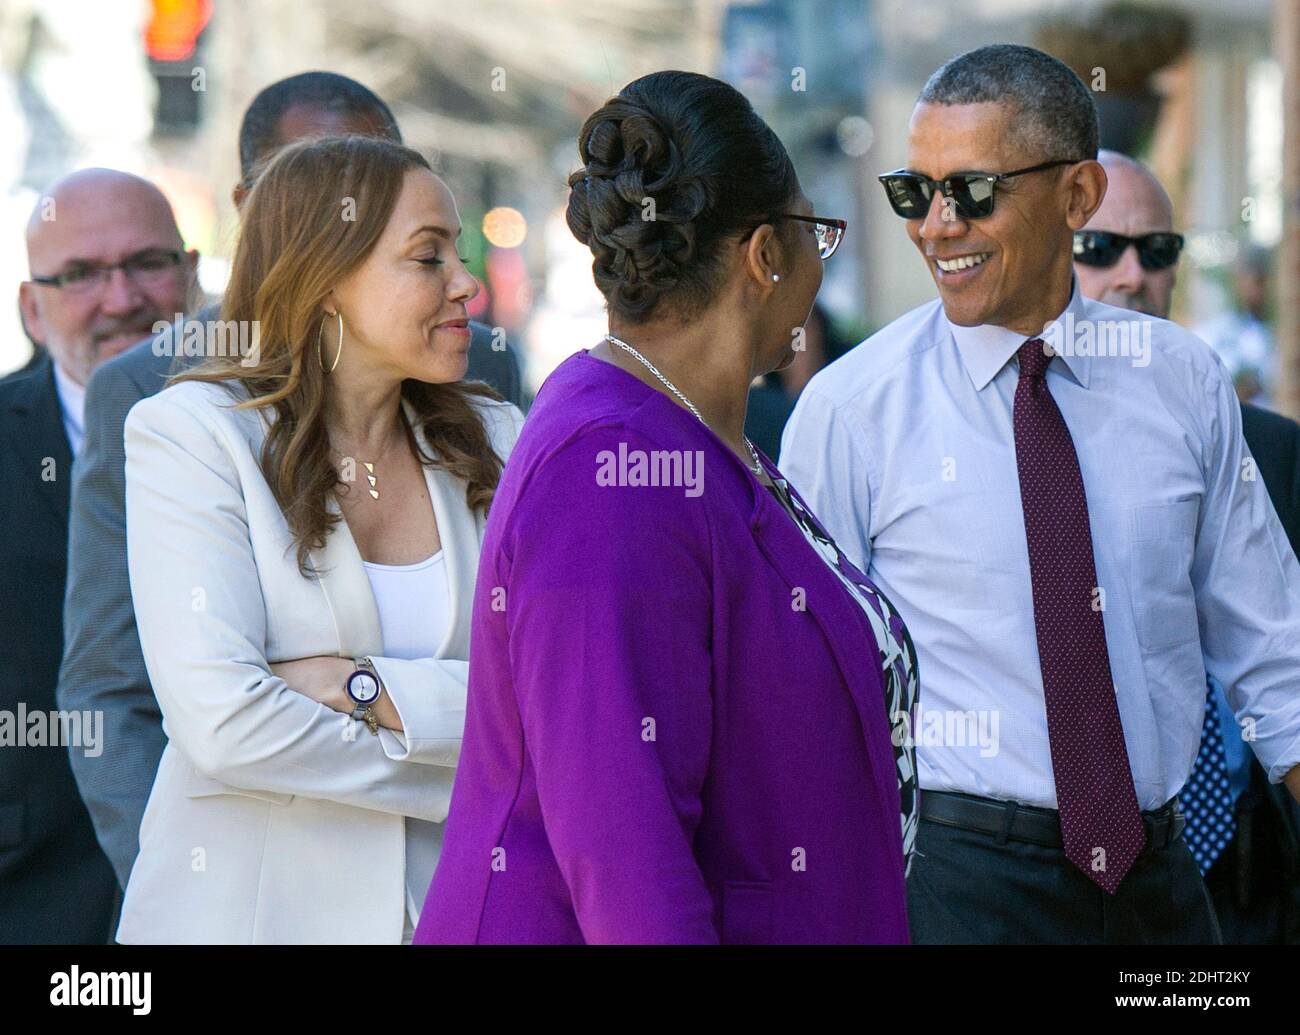 President Barack Obama walks with former inmates as he arrives to a roundtable event with formerly incarcerated individuals who have received commutations, in Washington, DC, USA, on March 30, 2016. Photo by Kevin Dietsch/Pool/ABACAPRESS.OM Stock Photo